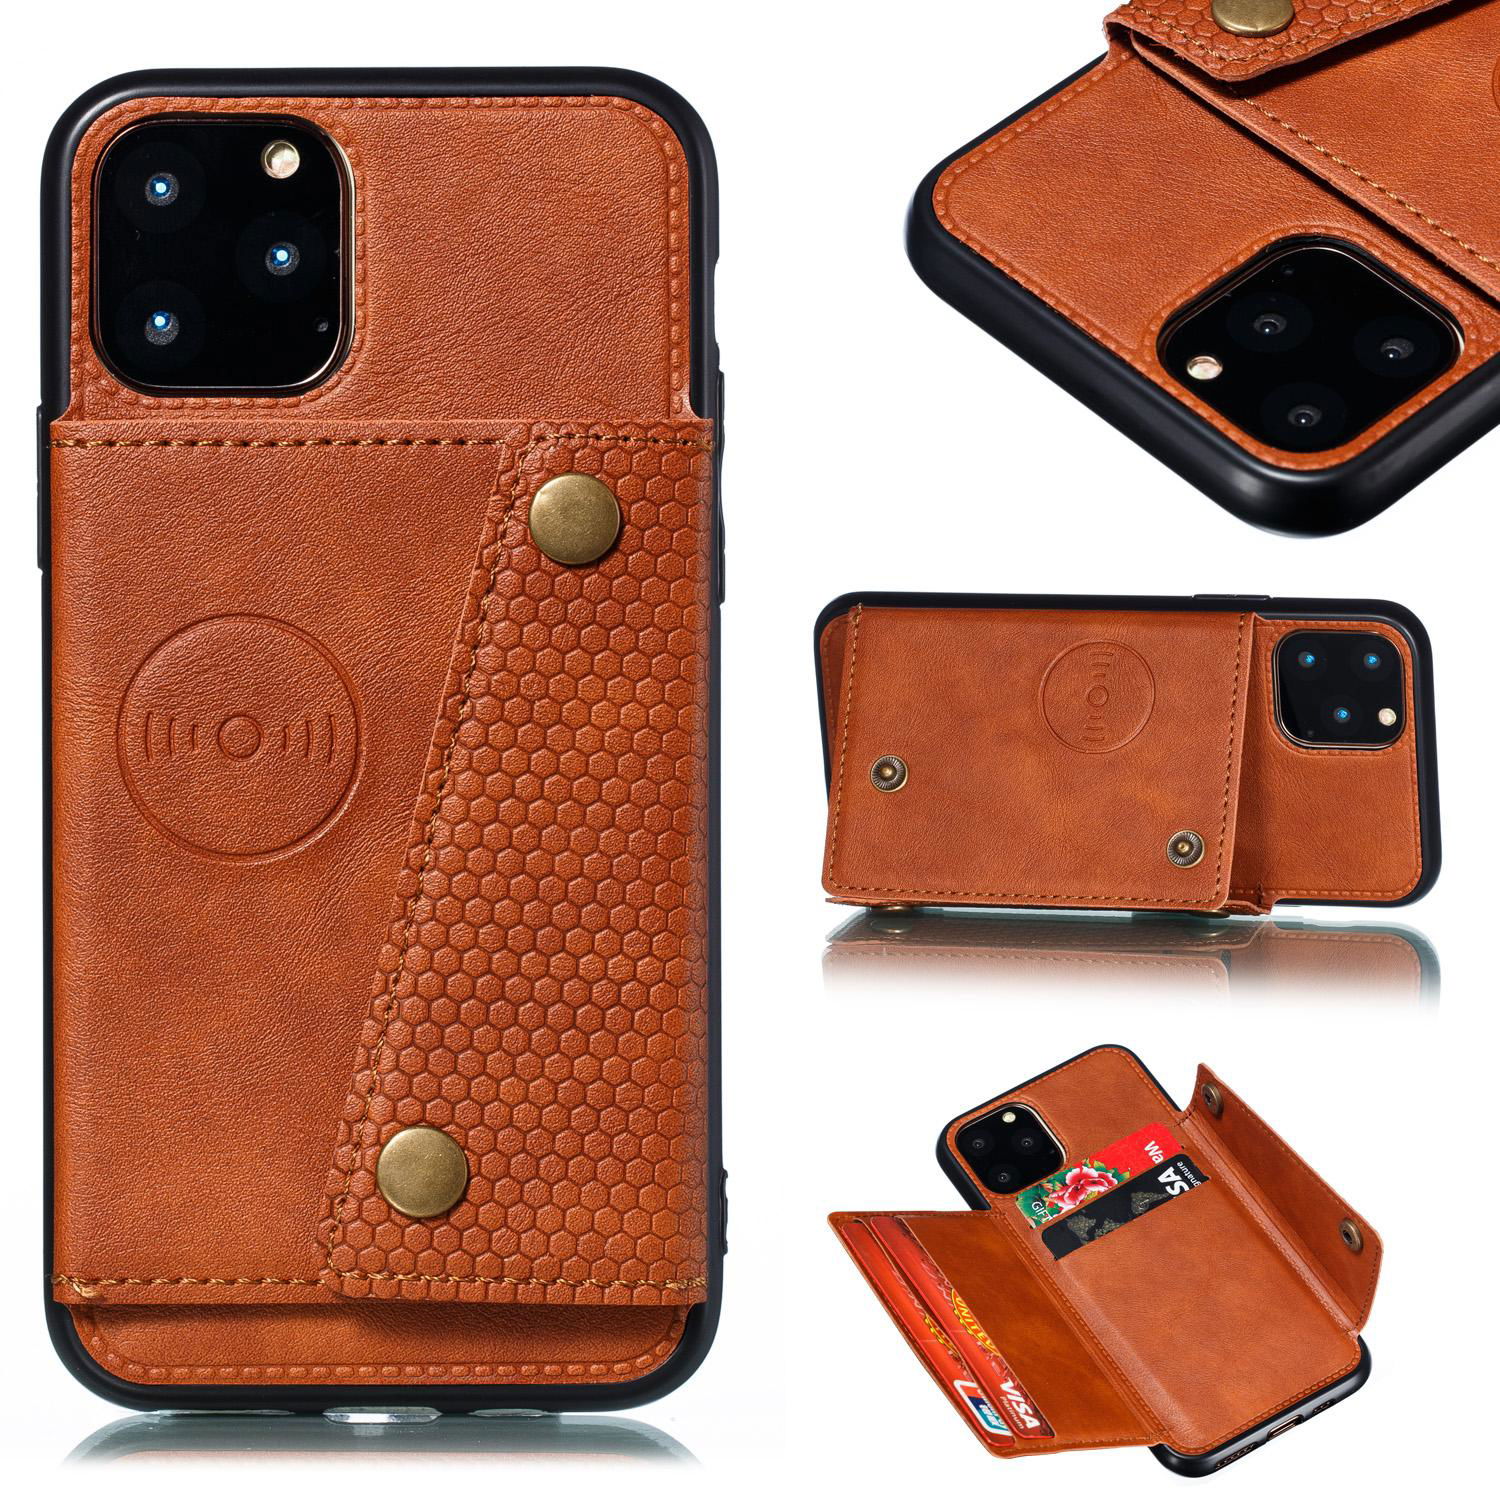 Leather Wallet Mobile Phone Bag Cellphone Case for iphone 12 2